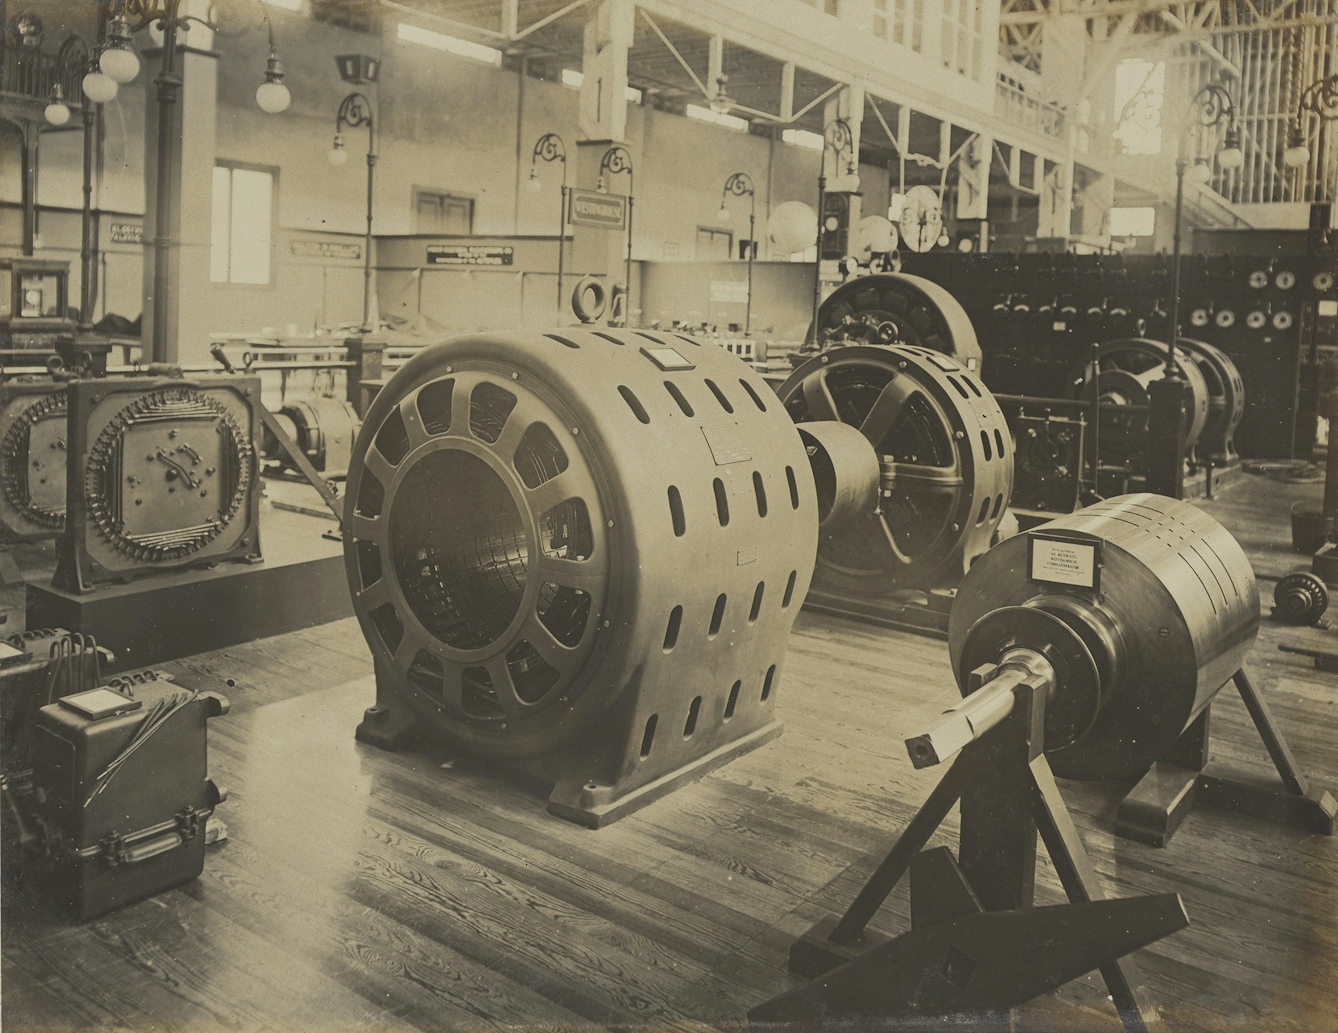 Electrical machinery such as dynamos, a popular attraction amongst visitors, was seen as a symbol of scientific progress and civilization.